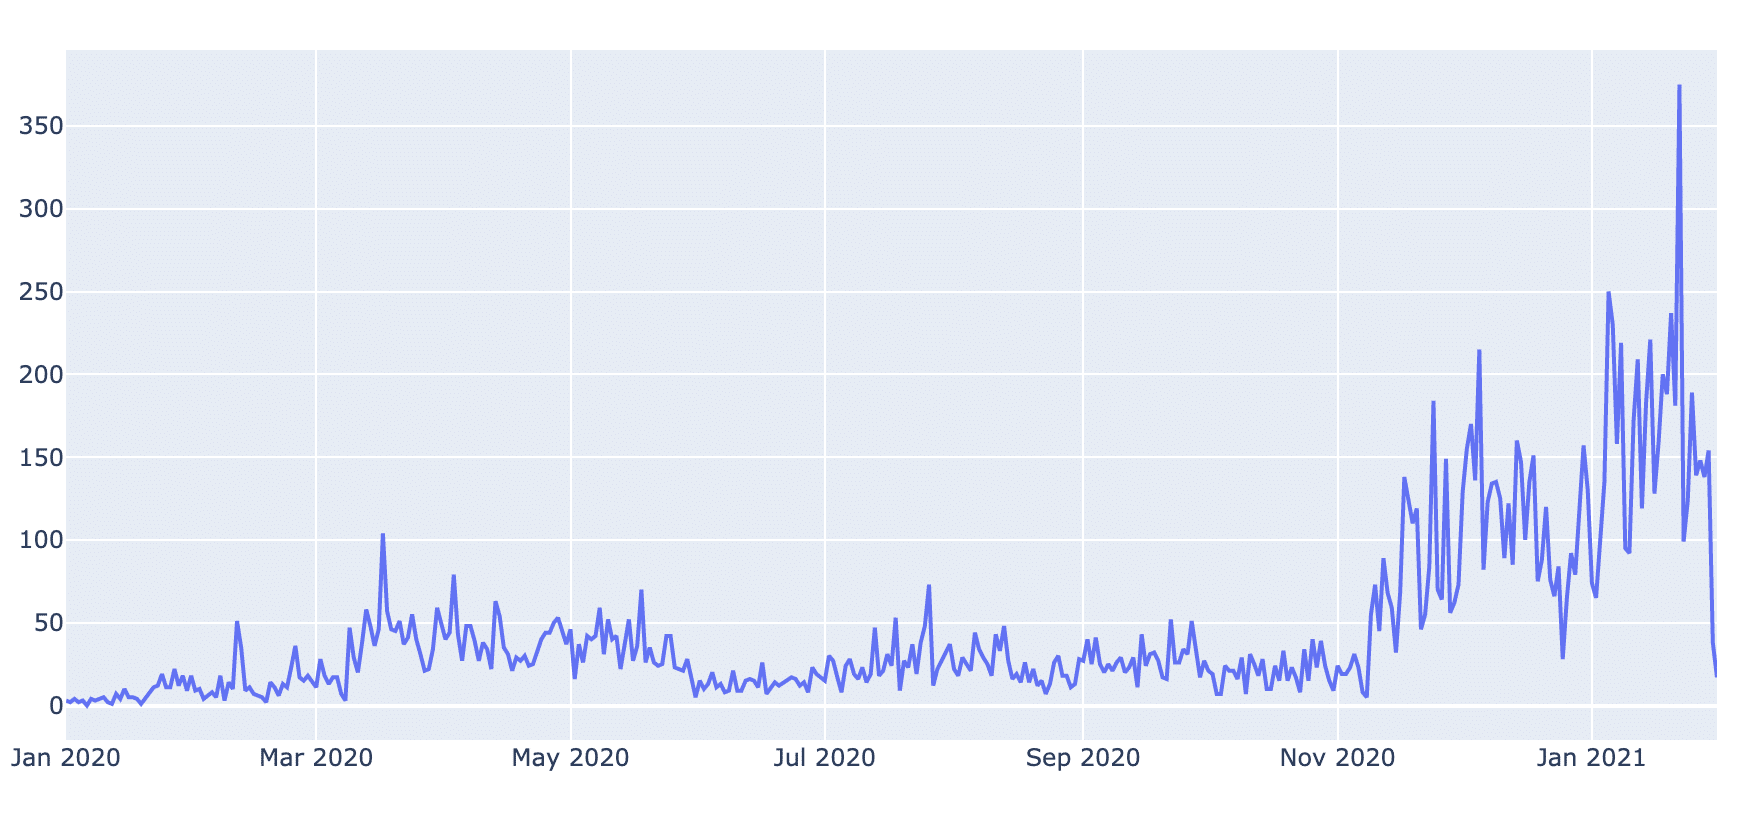 Plot of Term “vaccine” in Domains Since January 2020